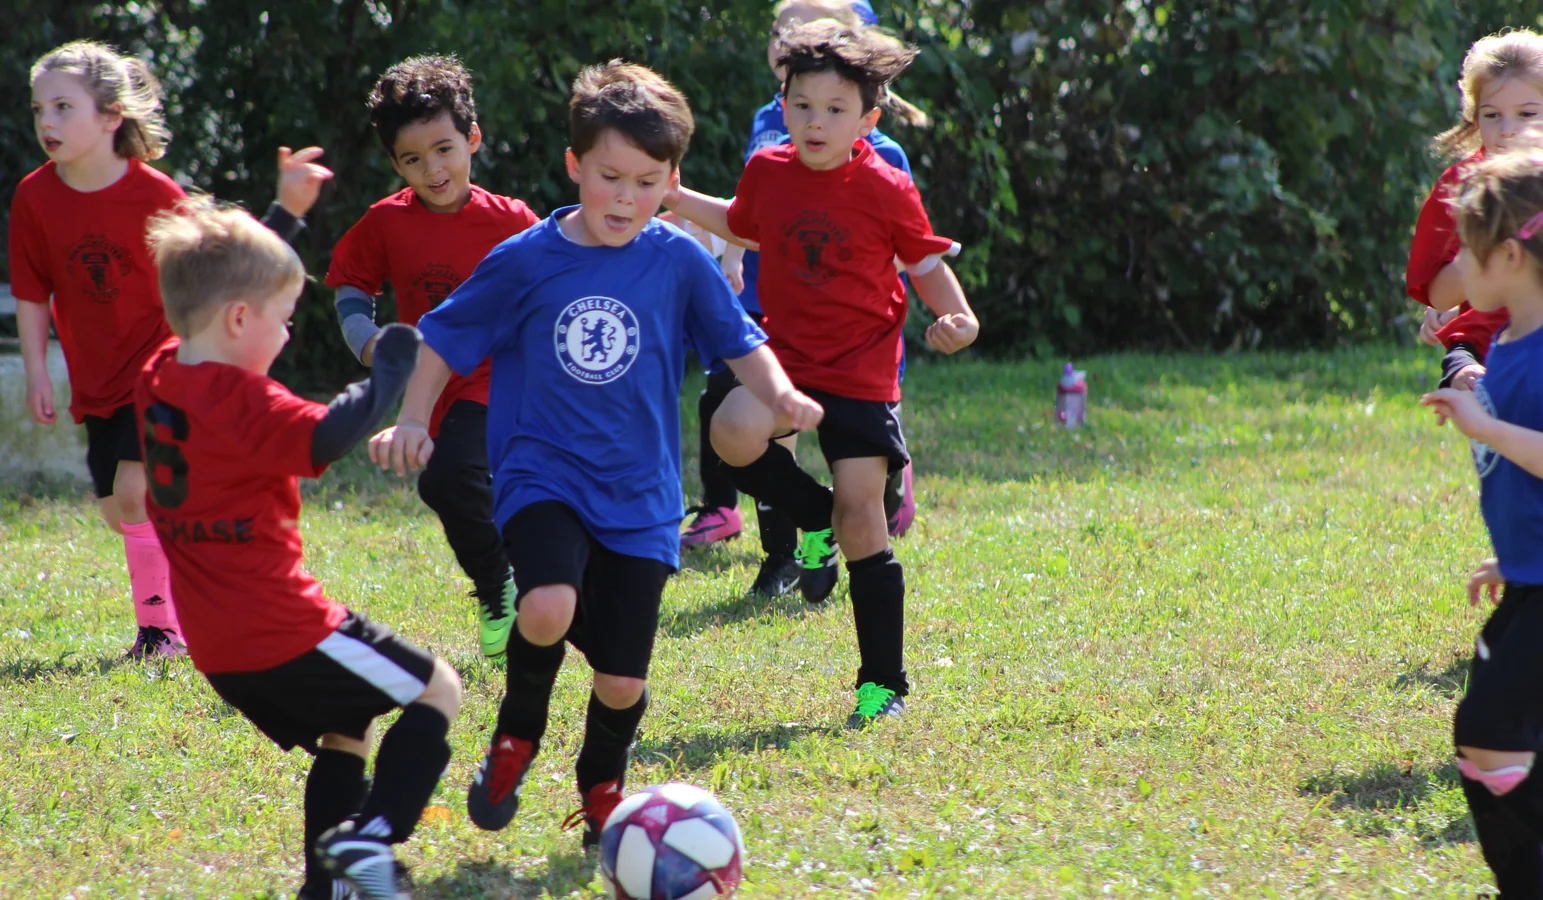 Sport improves concentration, leads to better quality of life in primary school students: Study